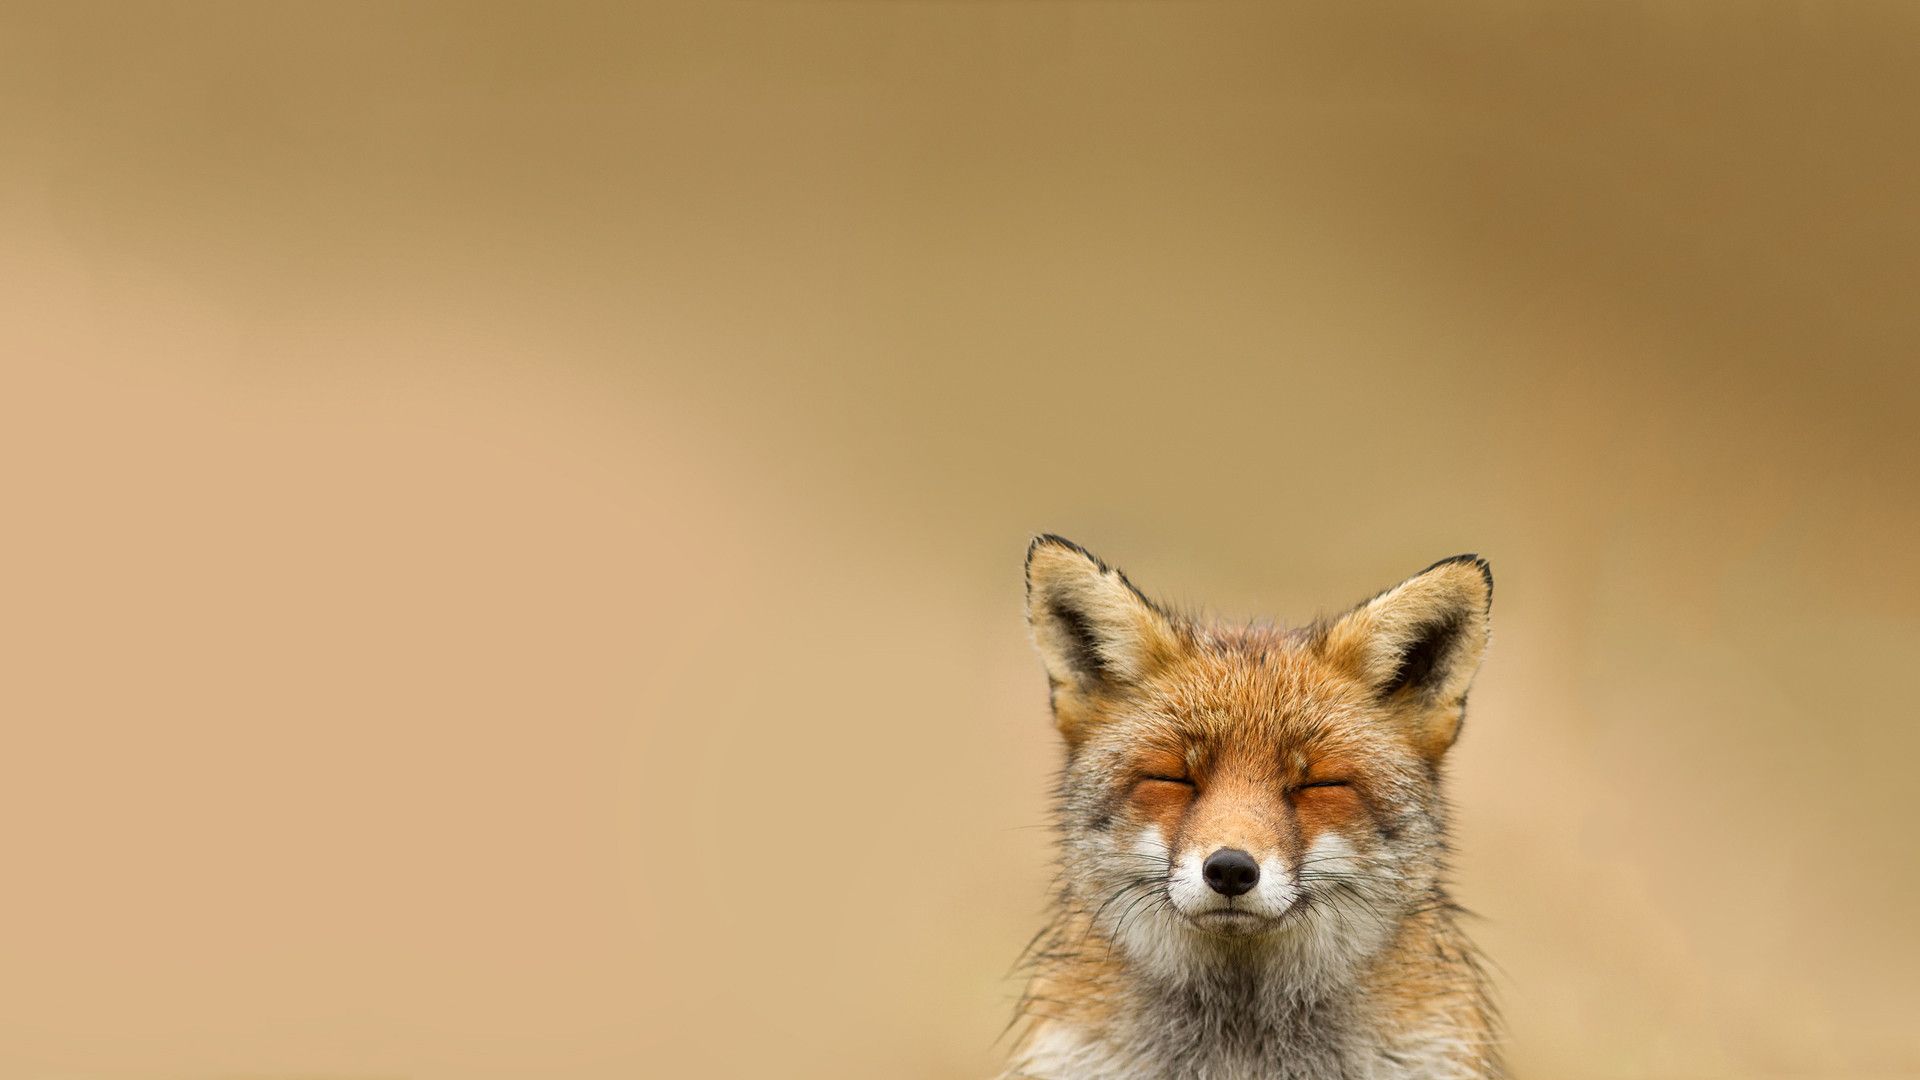 What Does The Fox Say? - added by kvnkvn at Free 1080P